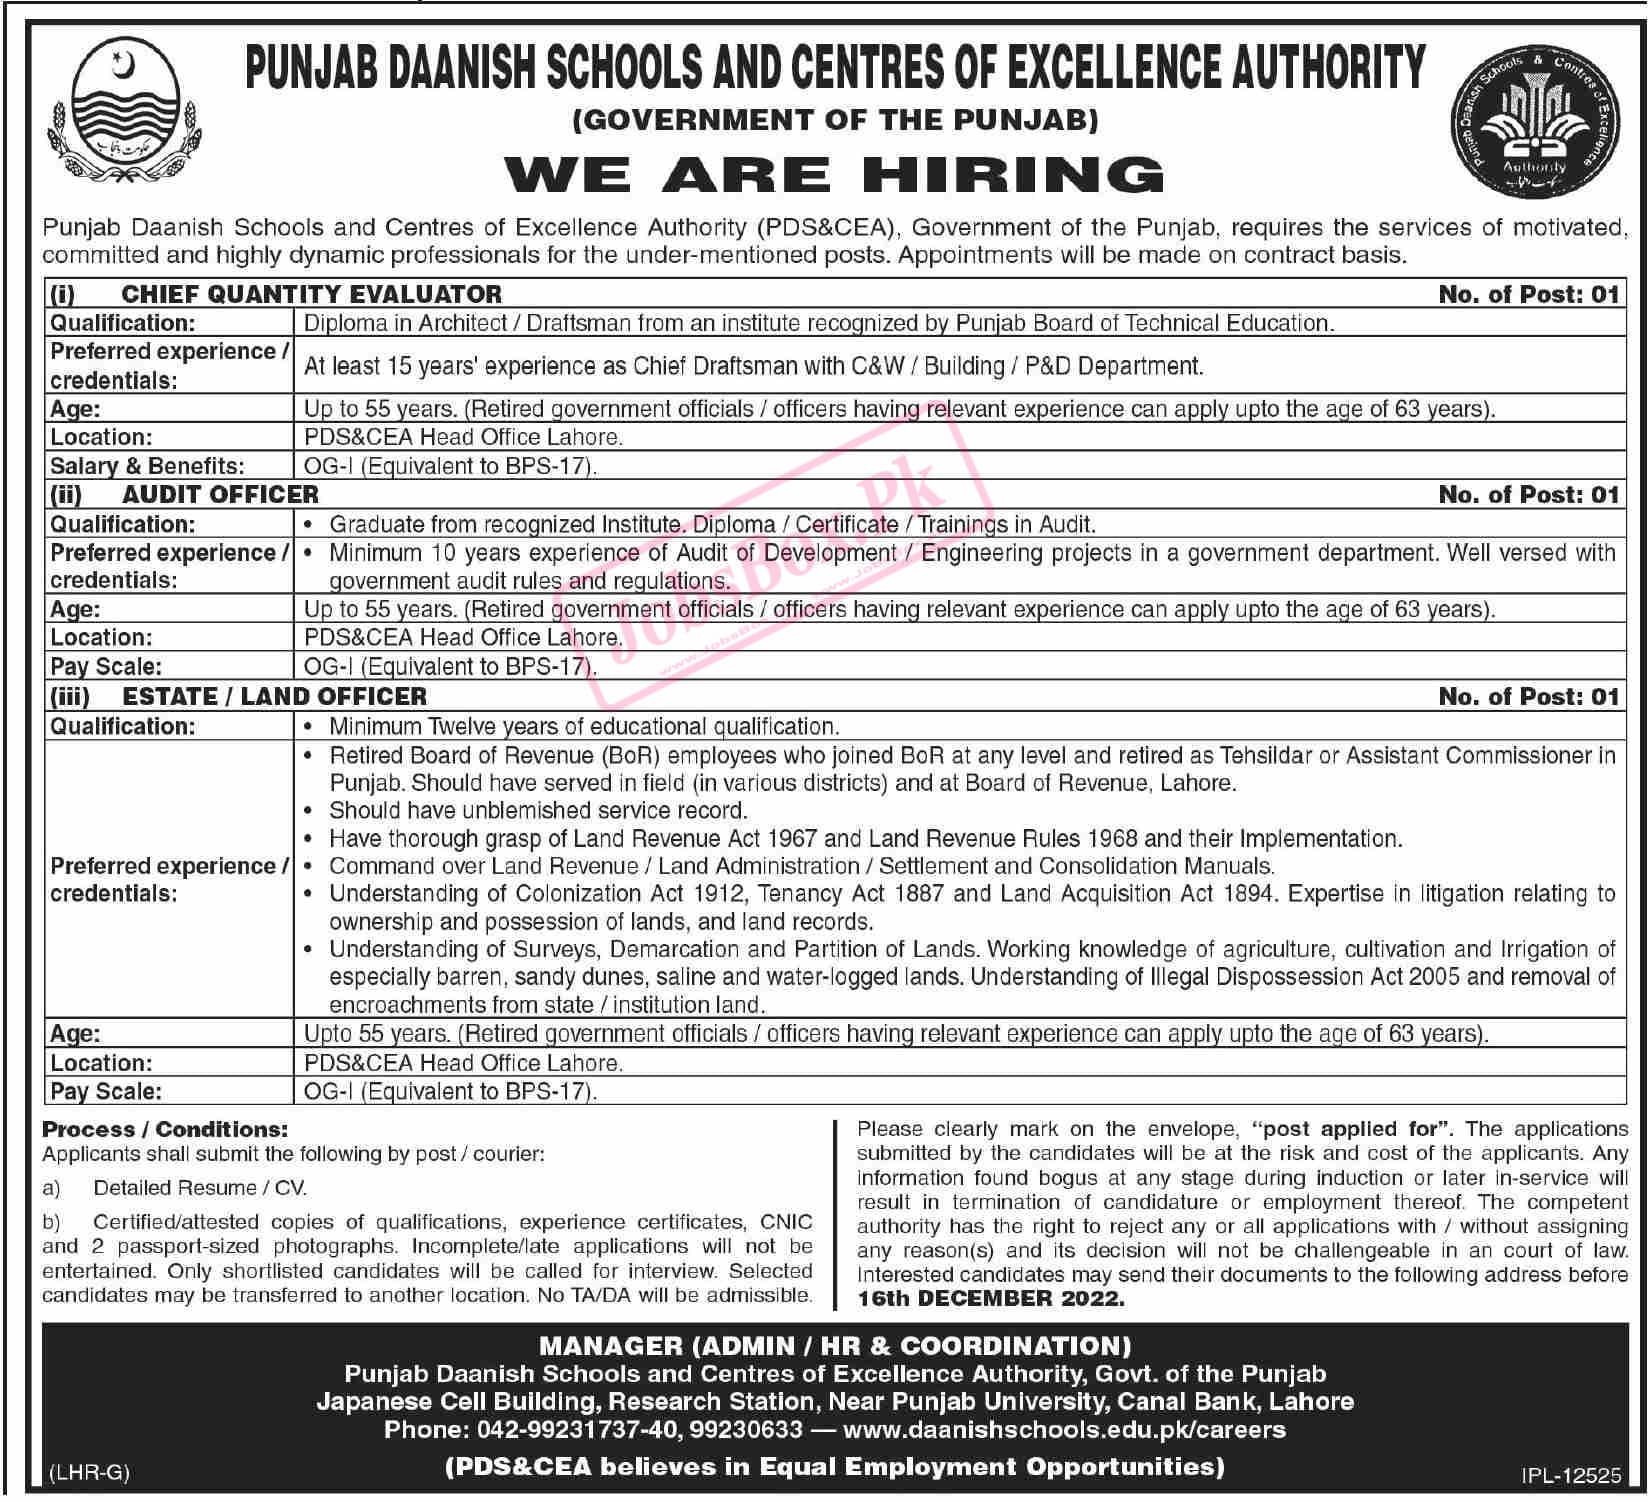 Latest Punjab Daanish Schools & Centers of Excellence Authority Jobs 2022 